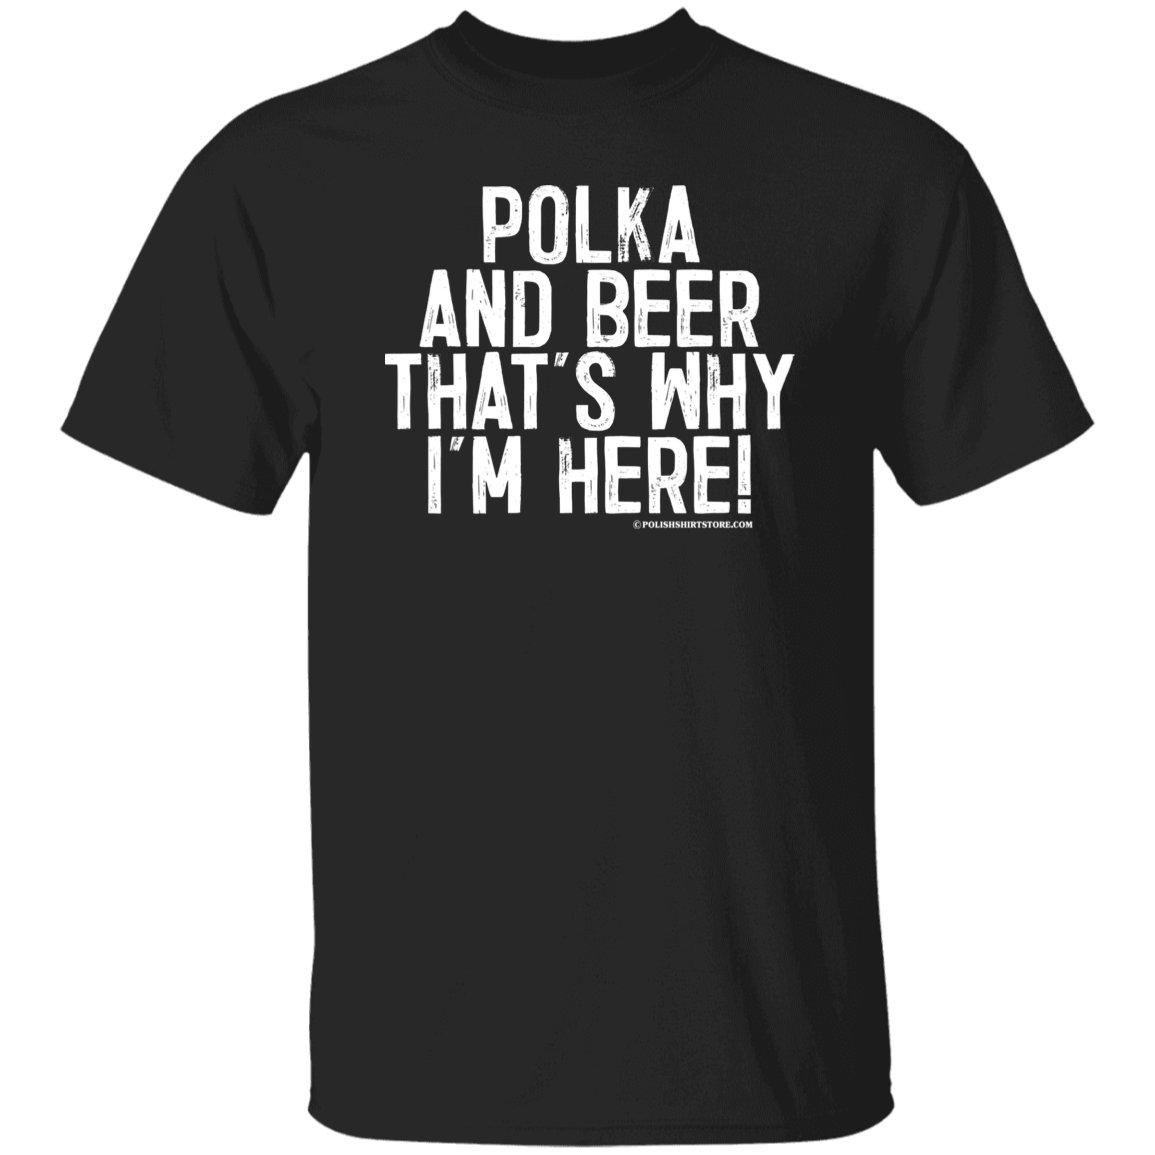 Polka and Beer That's Why I'm Here Apparel CustomCat G500 5.3 oz. T-Shirt Black S